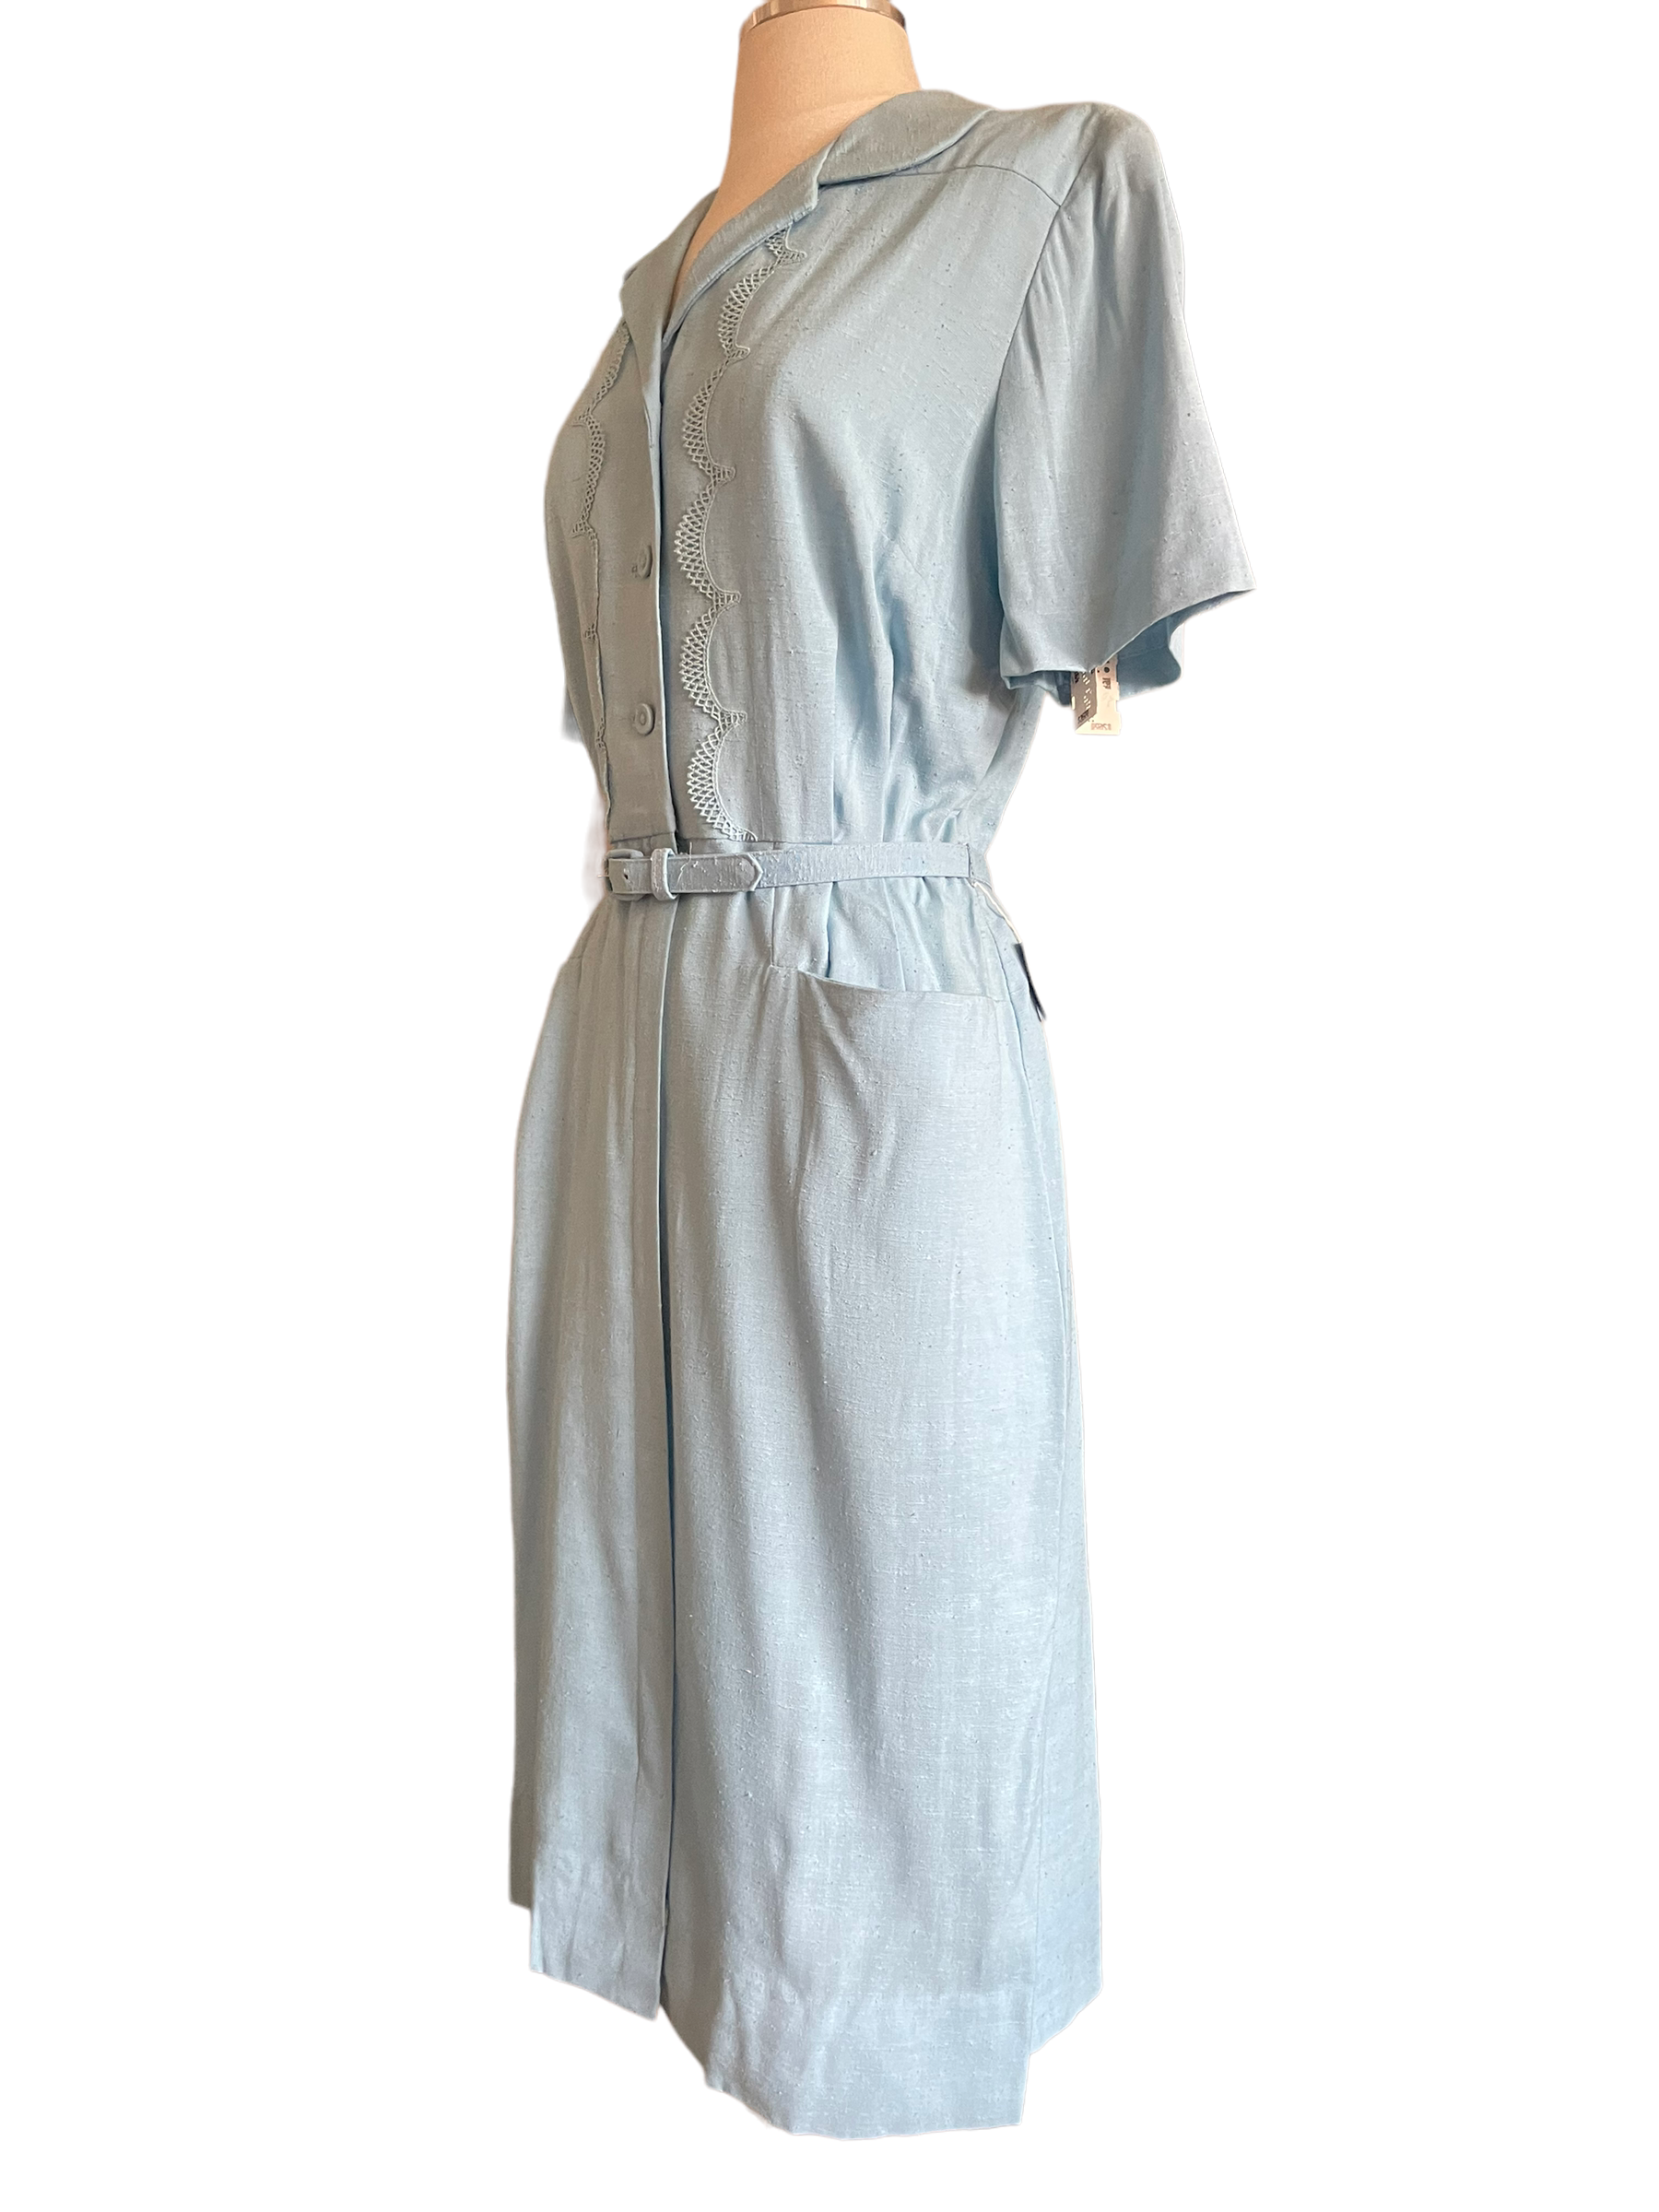 Vintage 1950s Deadstock Lordleigh Light Blue Silk and Rayon Dress SZ M|  Barn Owl Vintage | Seattle Vintage Dresses Front left side view.